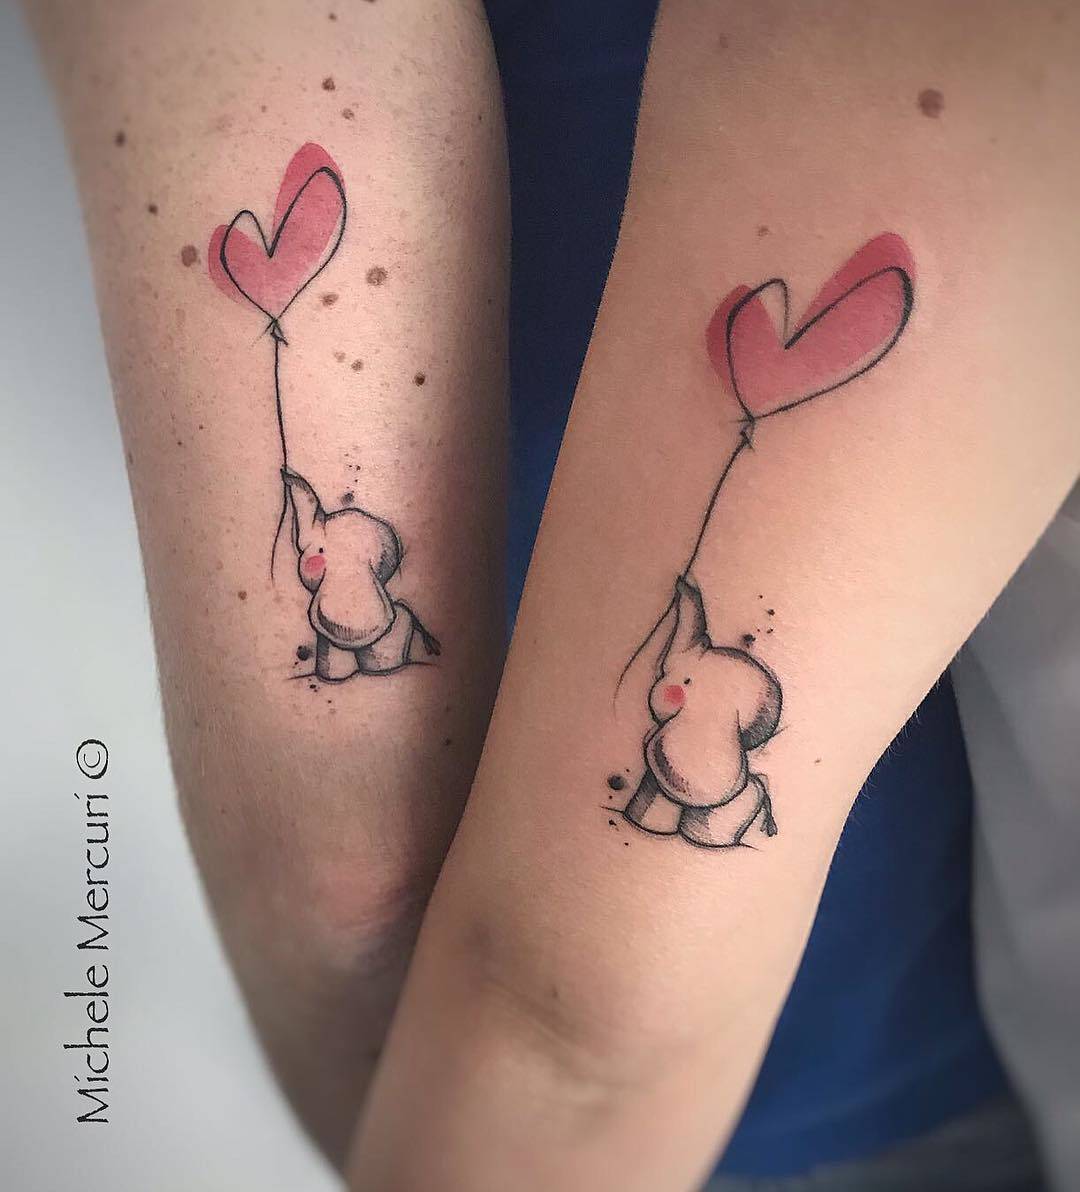 Gorgeous And Incredible Couple Matching Tattoo Designs You Must Try With Your Love; Couple Tattoo Ideas; Couple Tattoos; Matching Couple Tattoos;Simple Couple Matching Tattoo;Tattoos;  #Tattoos #Coupletattoo#Matchingtattoo